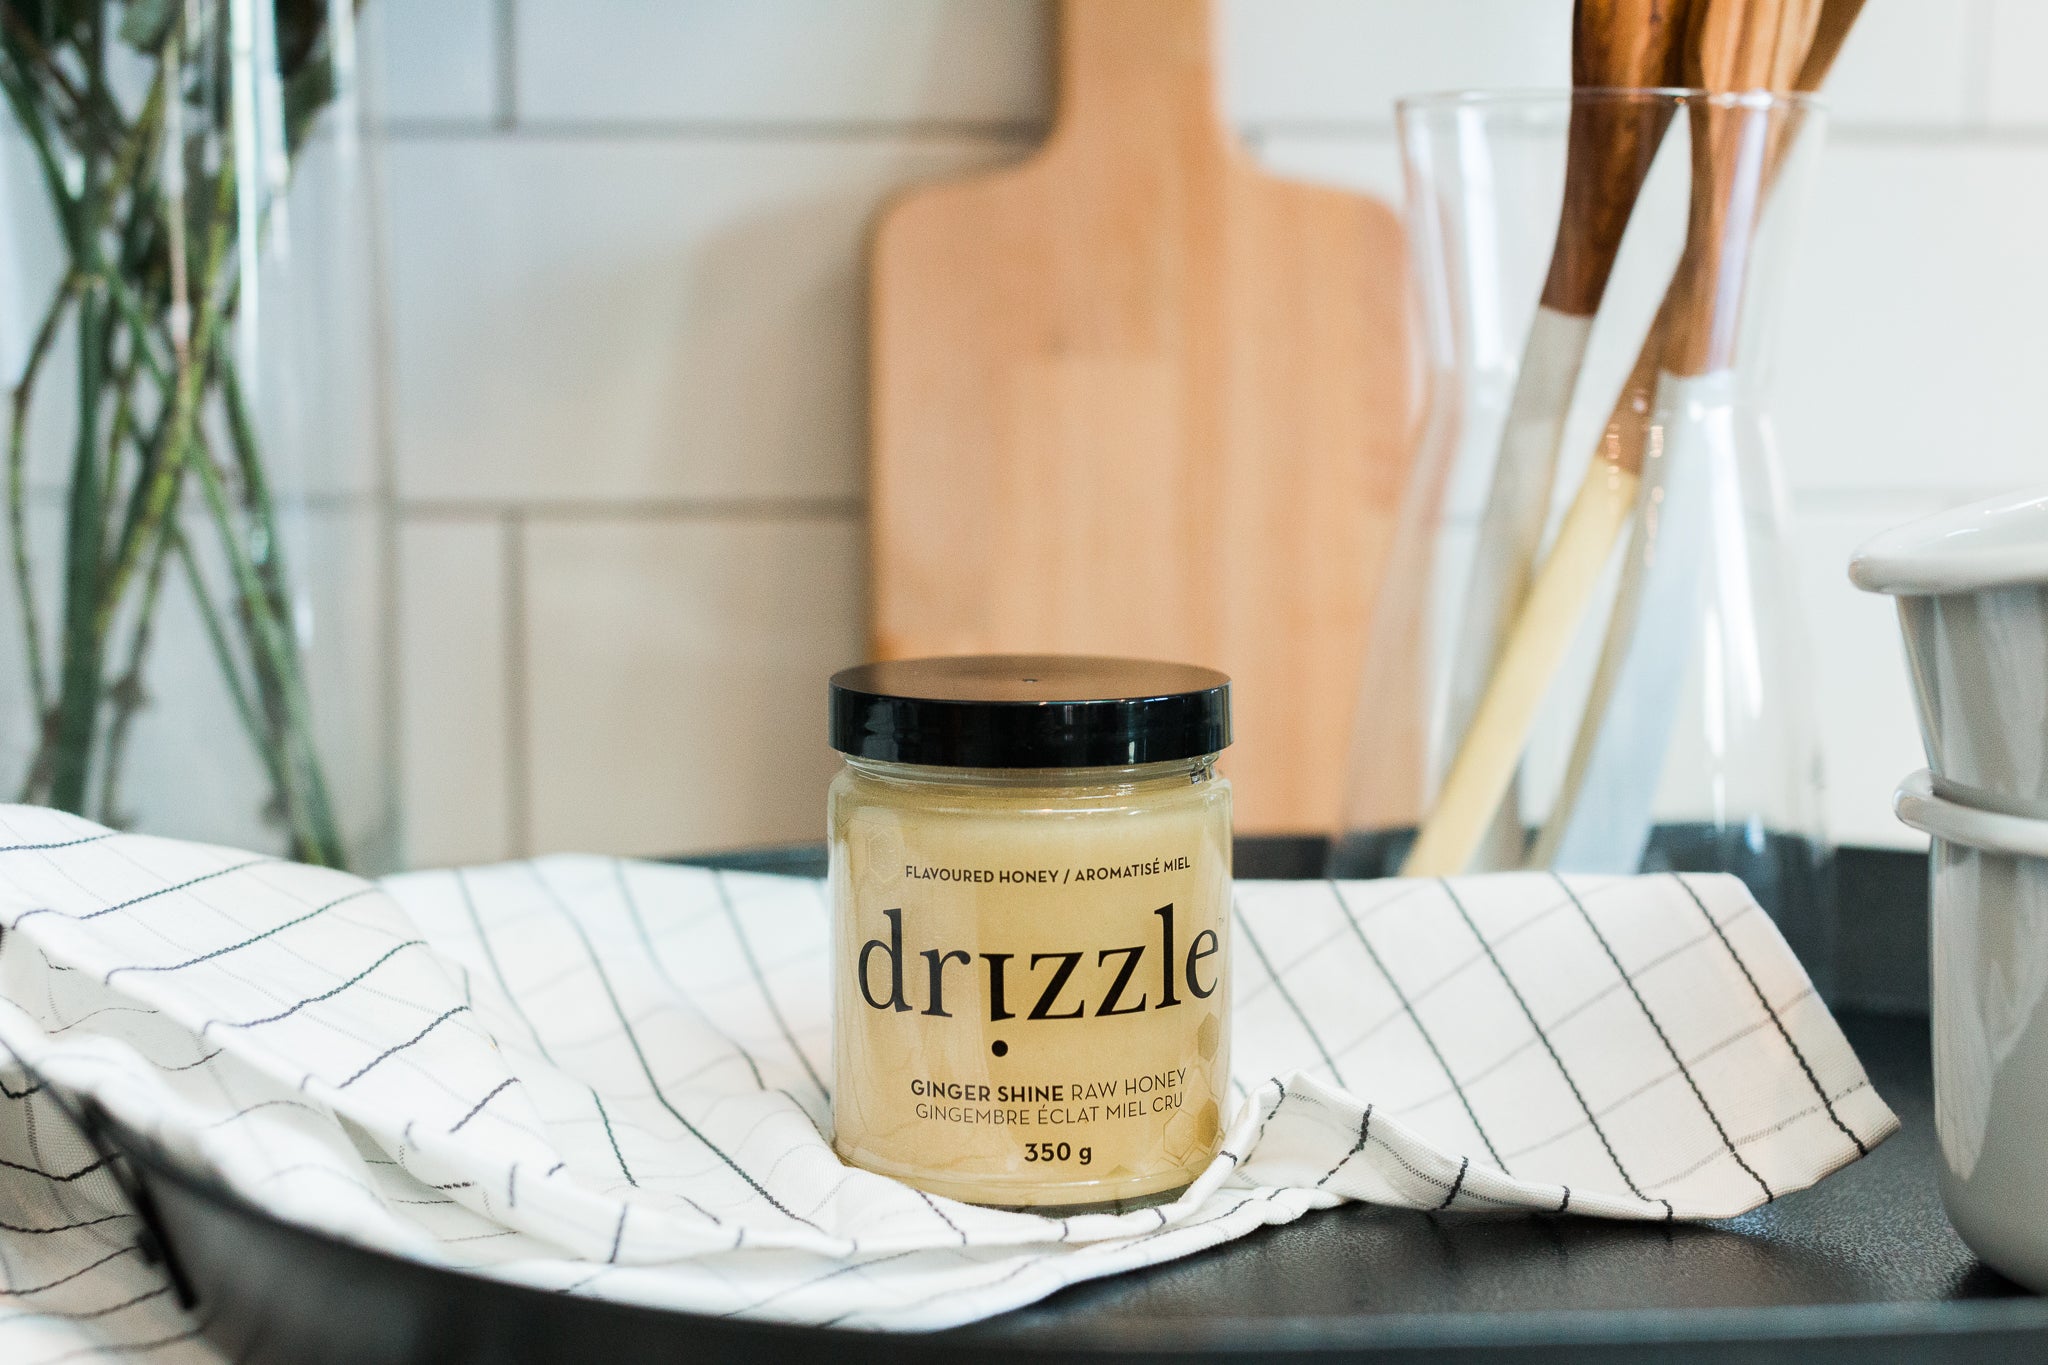 Drizzle Ginger Shine Raw Honey in a kitchen.